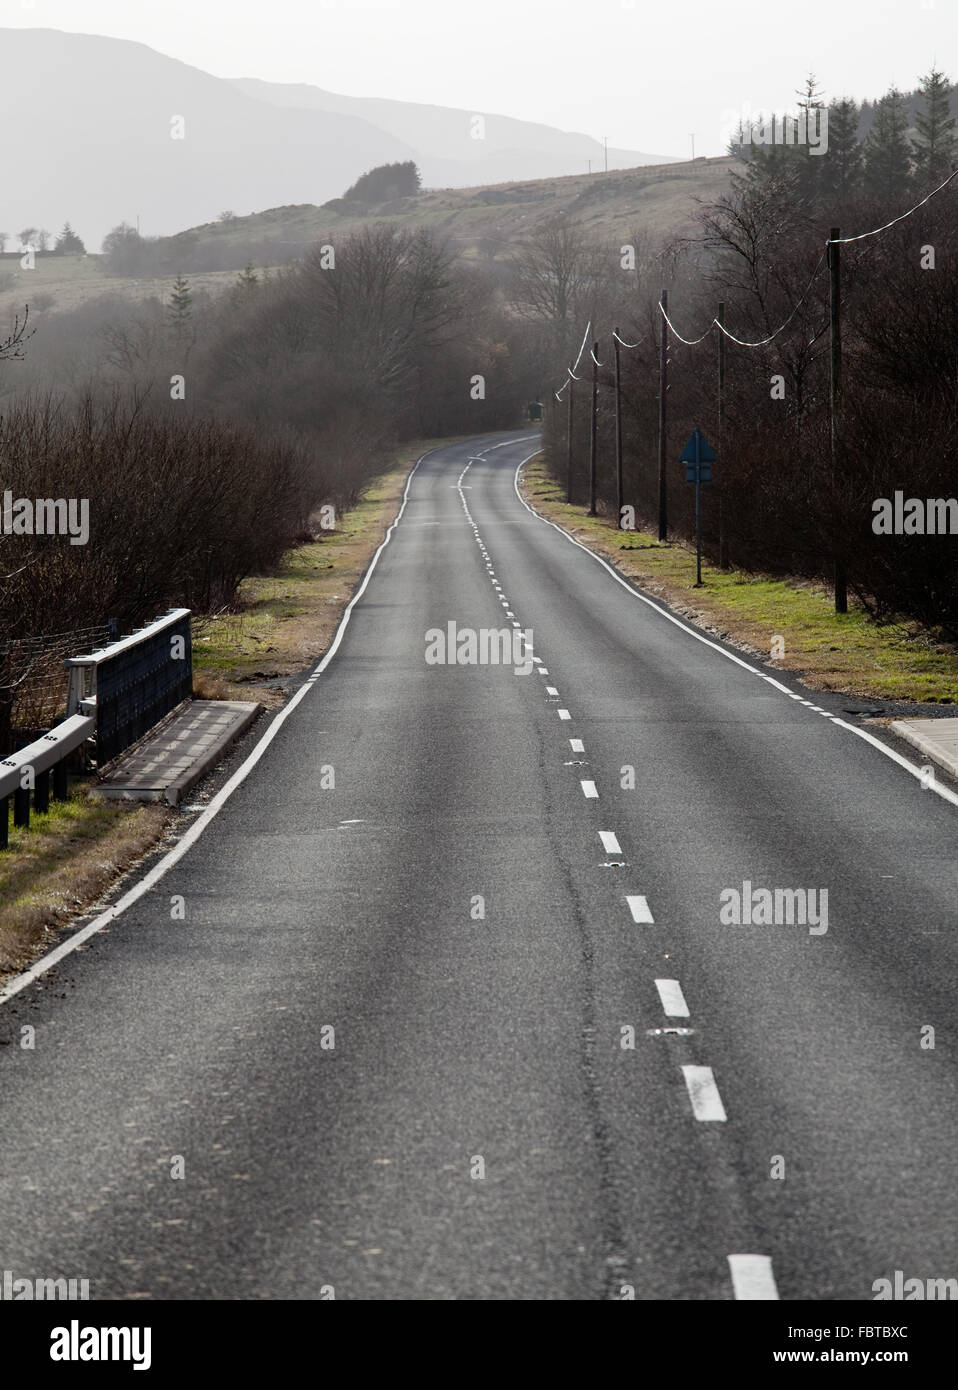 A single carriageway road leads into the distance among hills and meadows Stock Photo